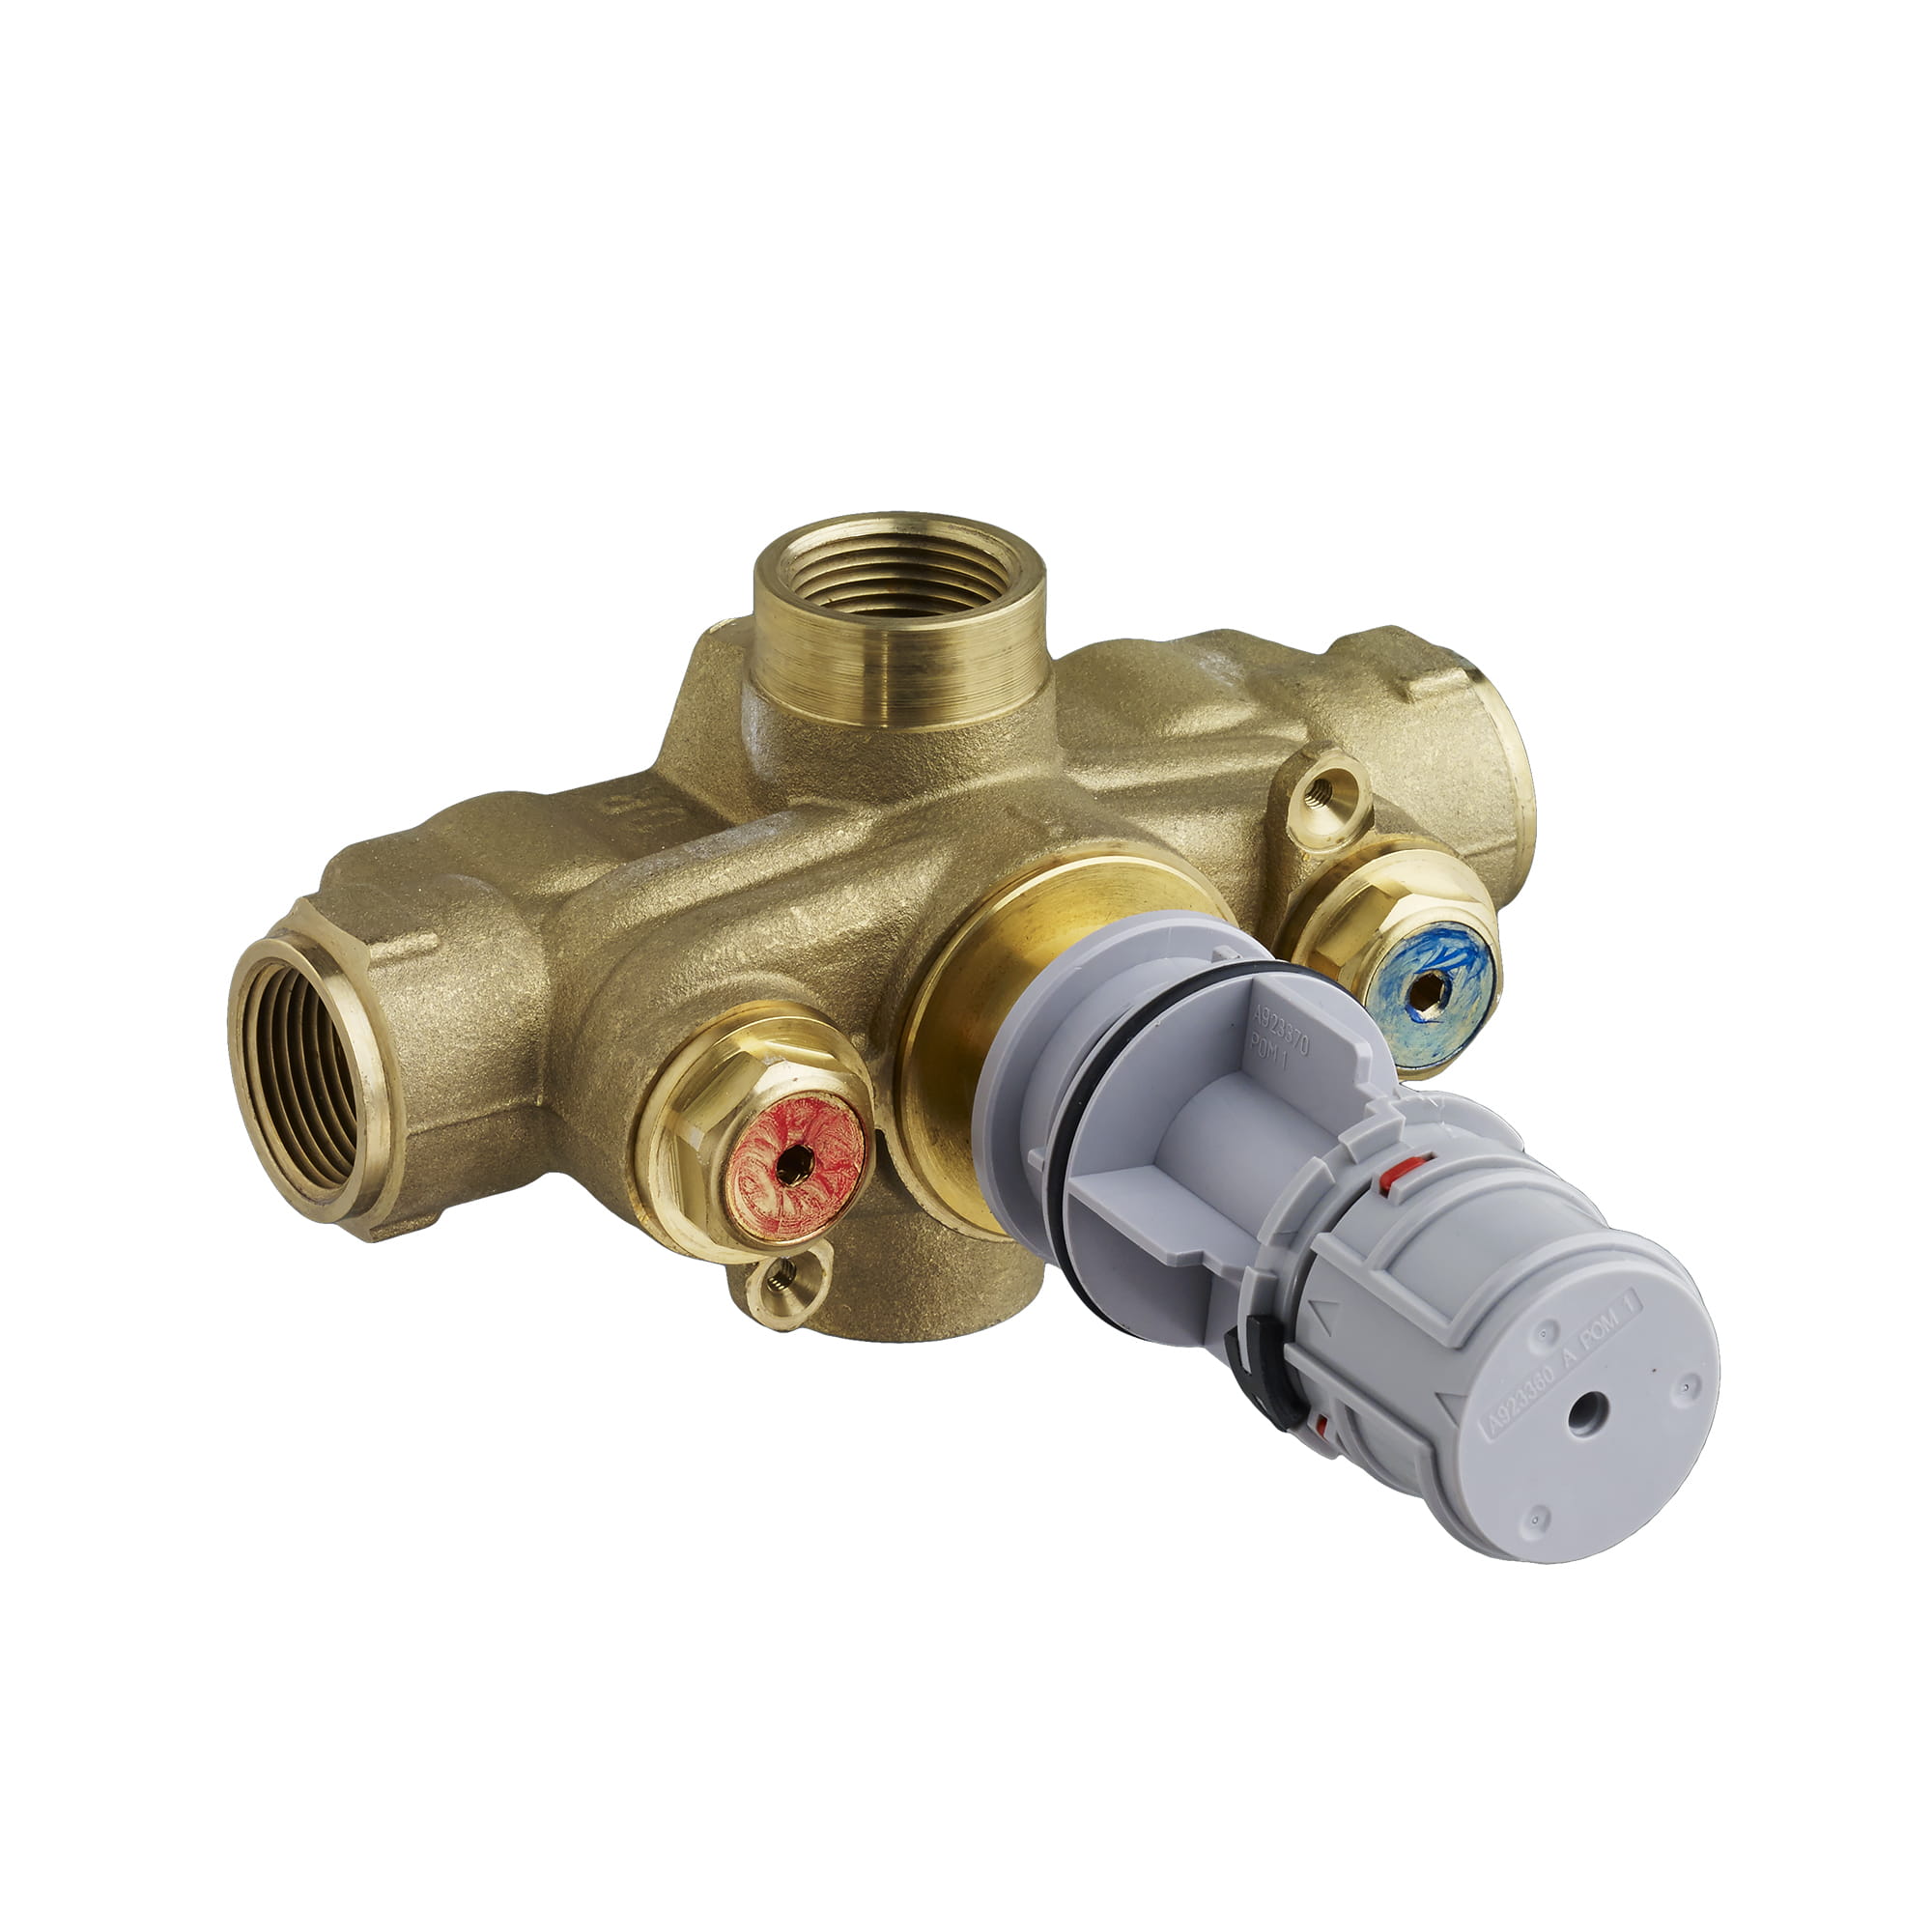 3/4 Inch Thermostatic Wall Rough Valve